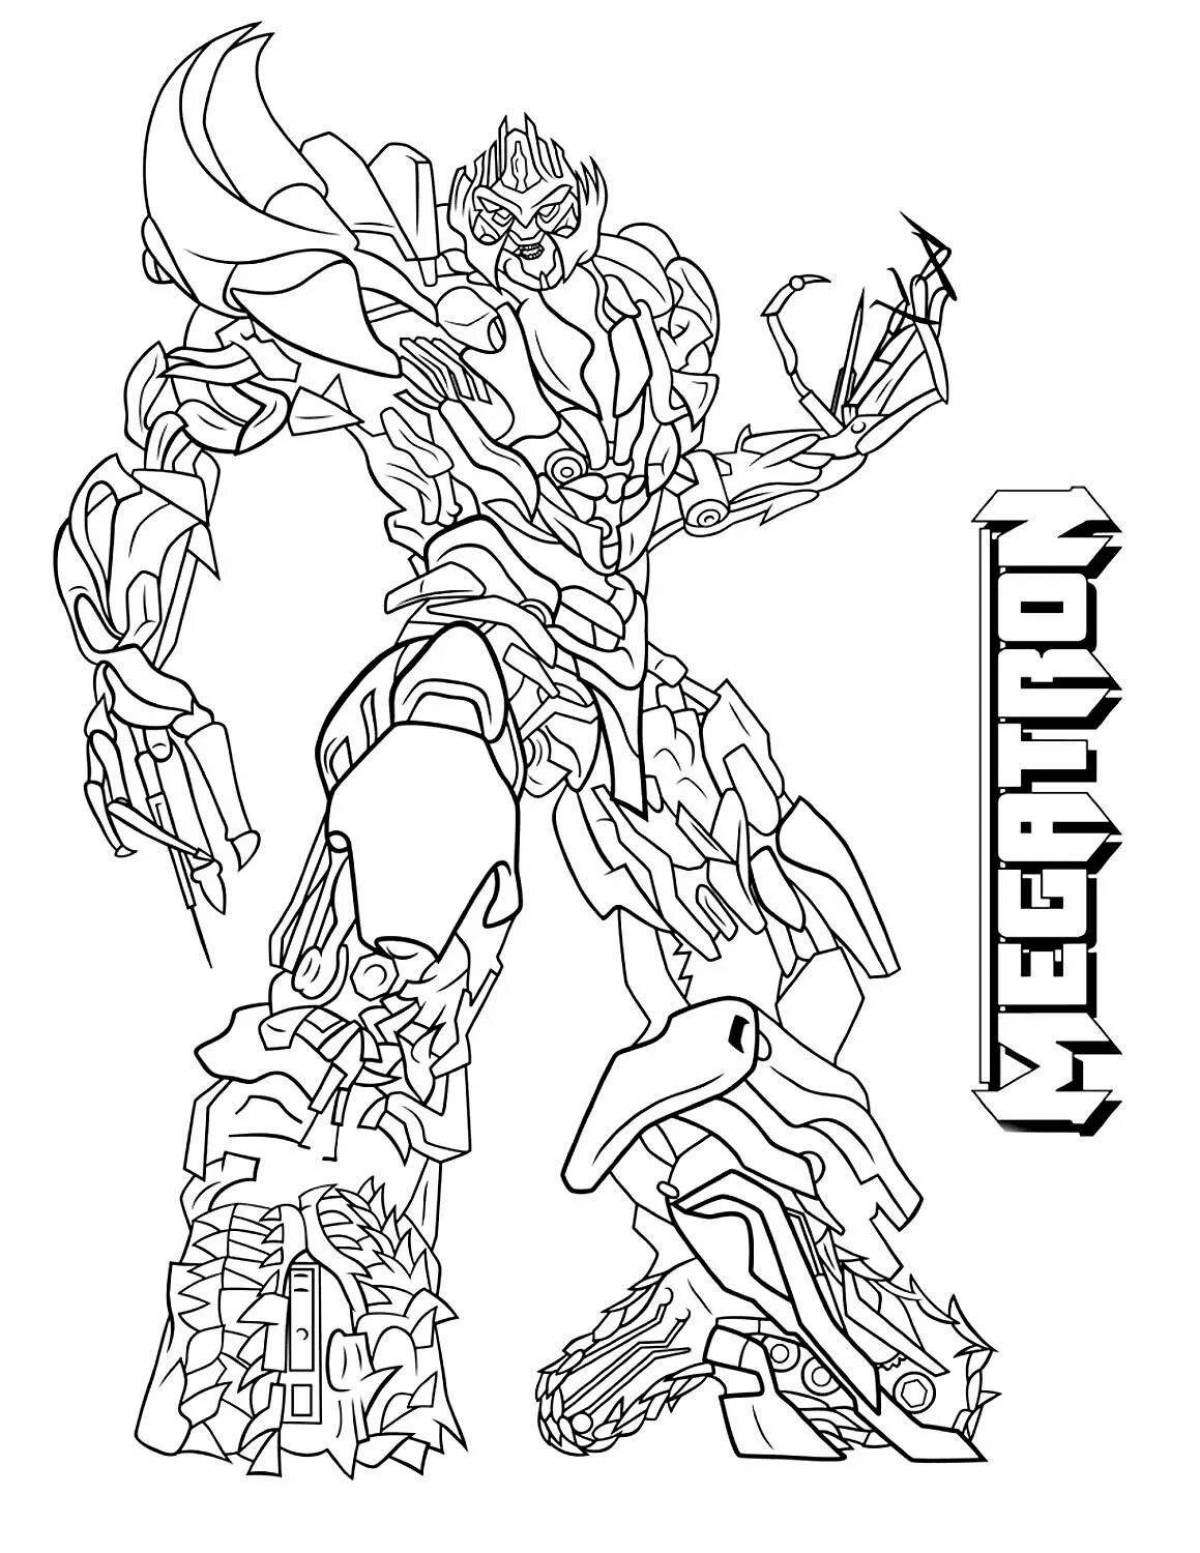 Awesome barricade coloring page